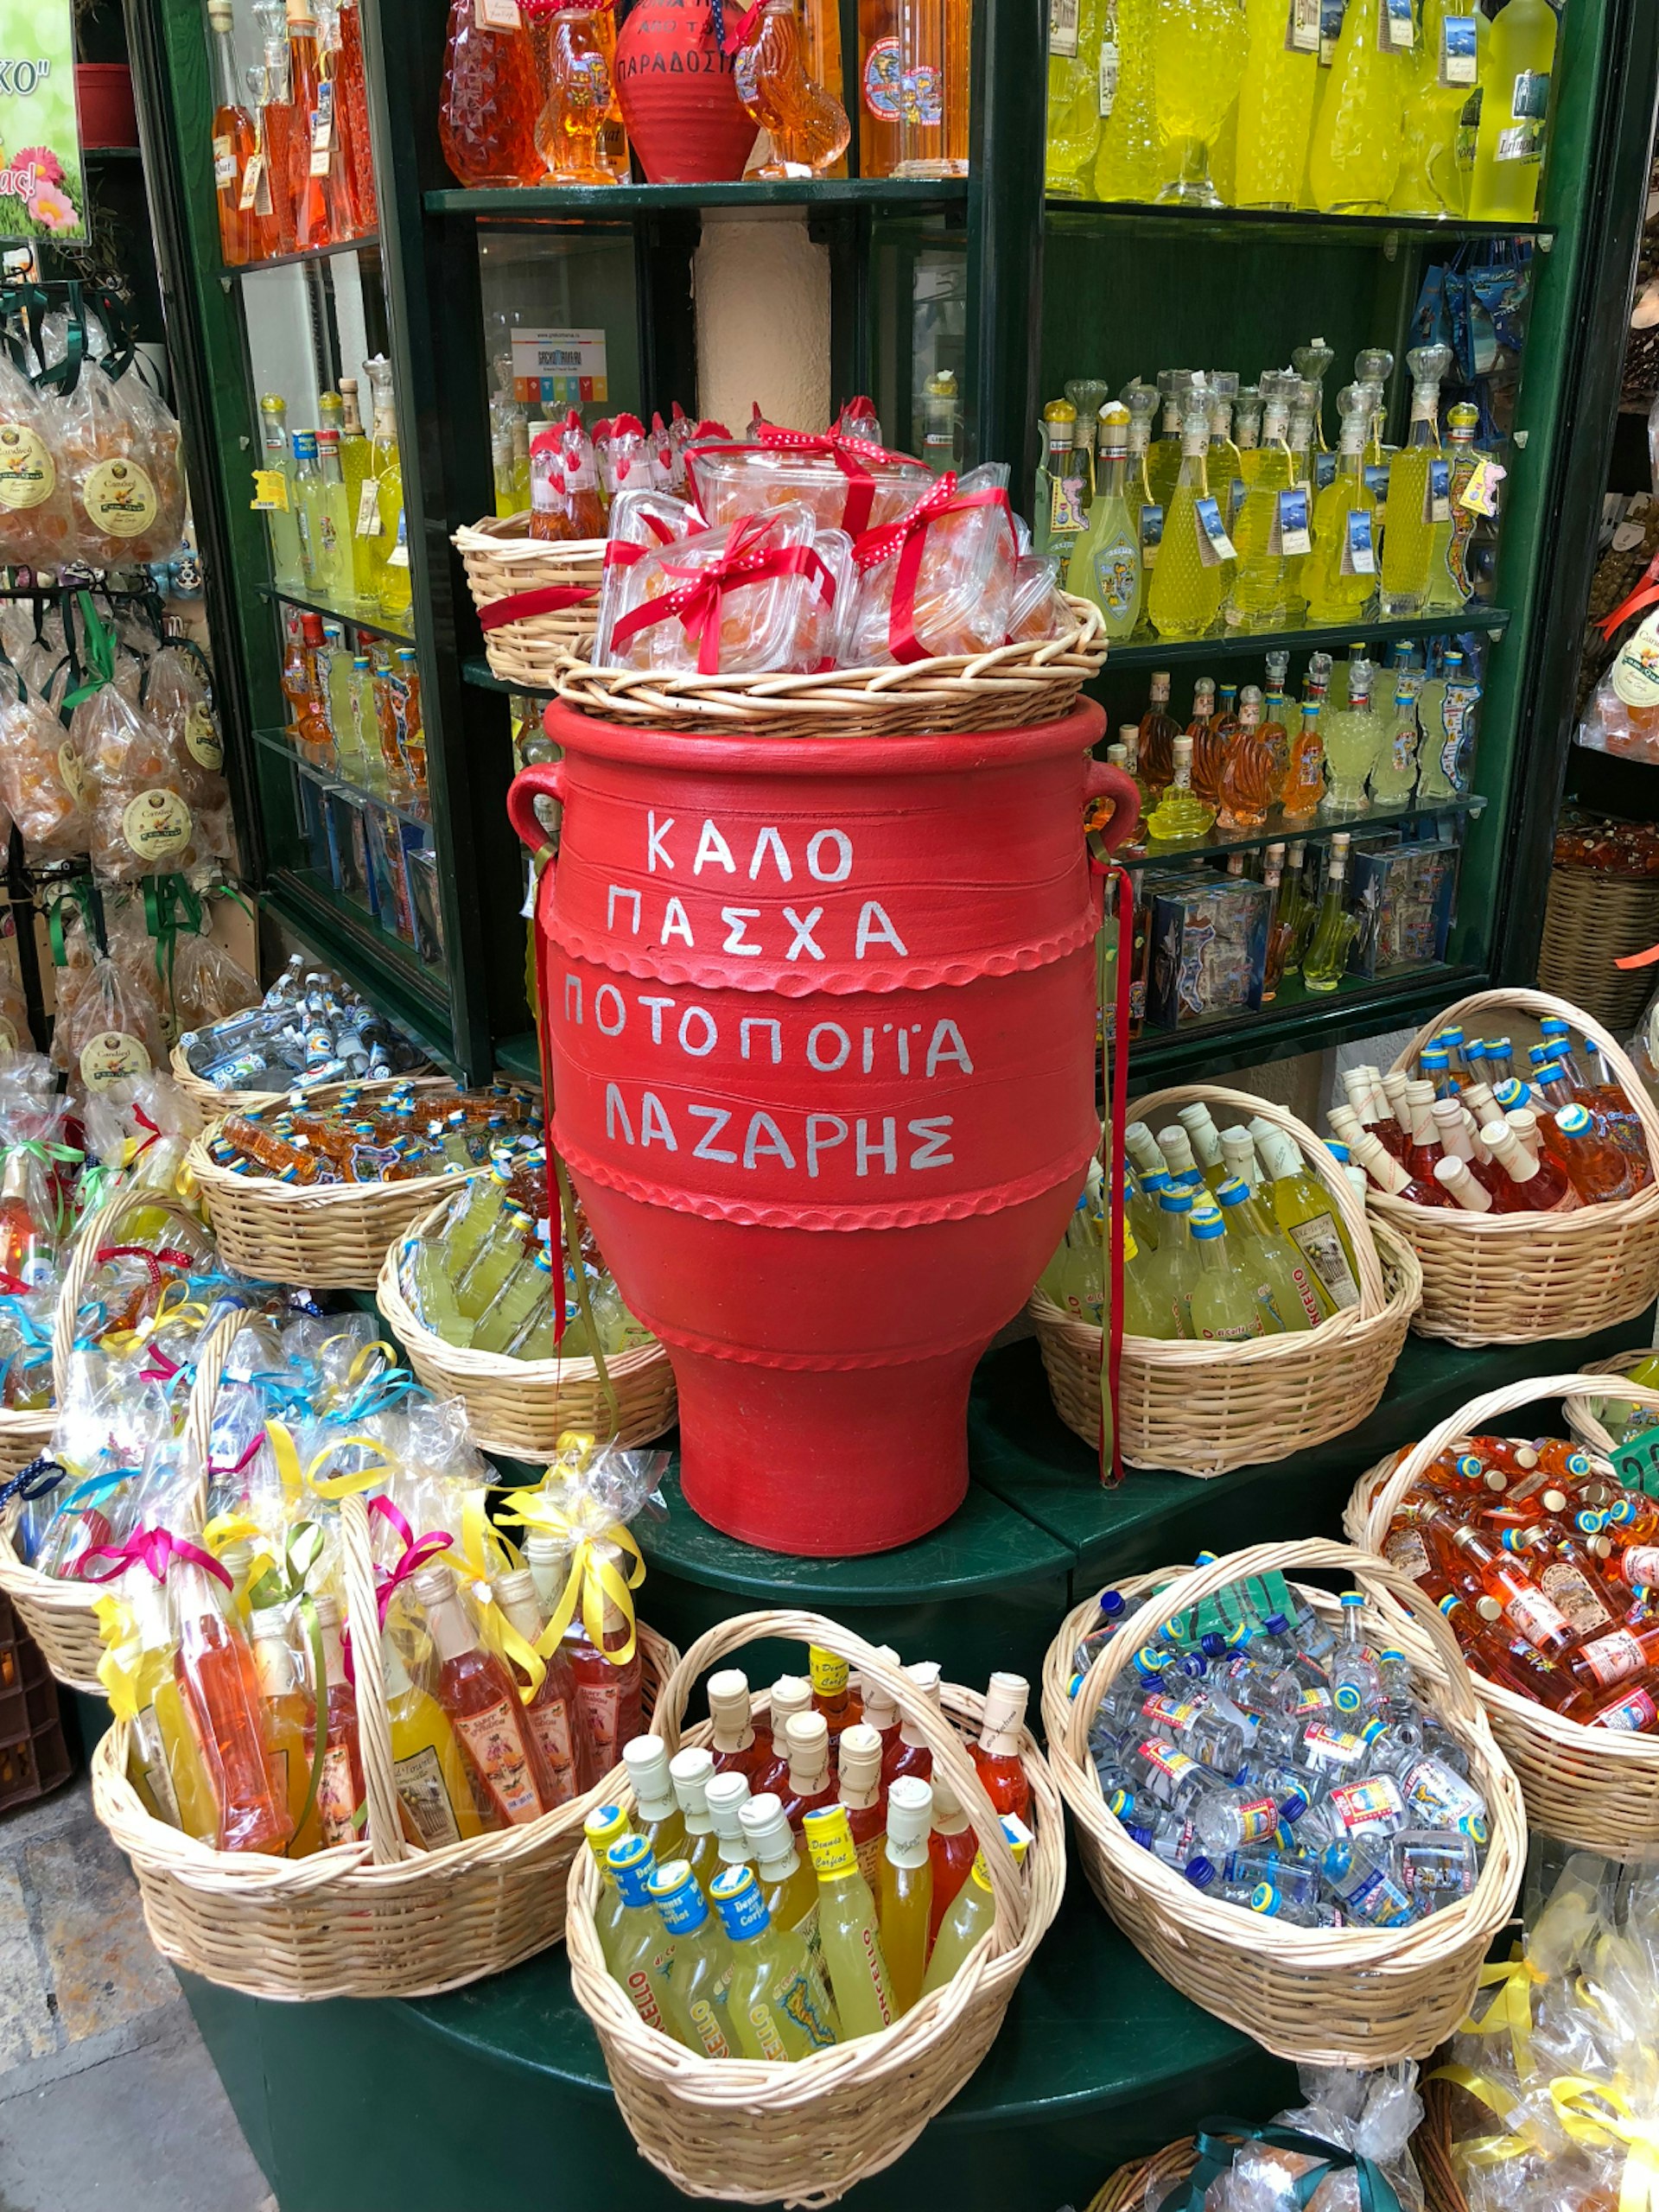 Souvenirs and products from Corfu for sale during Easter in Greece